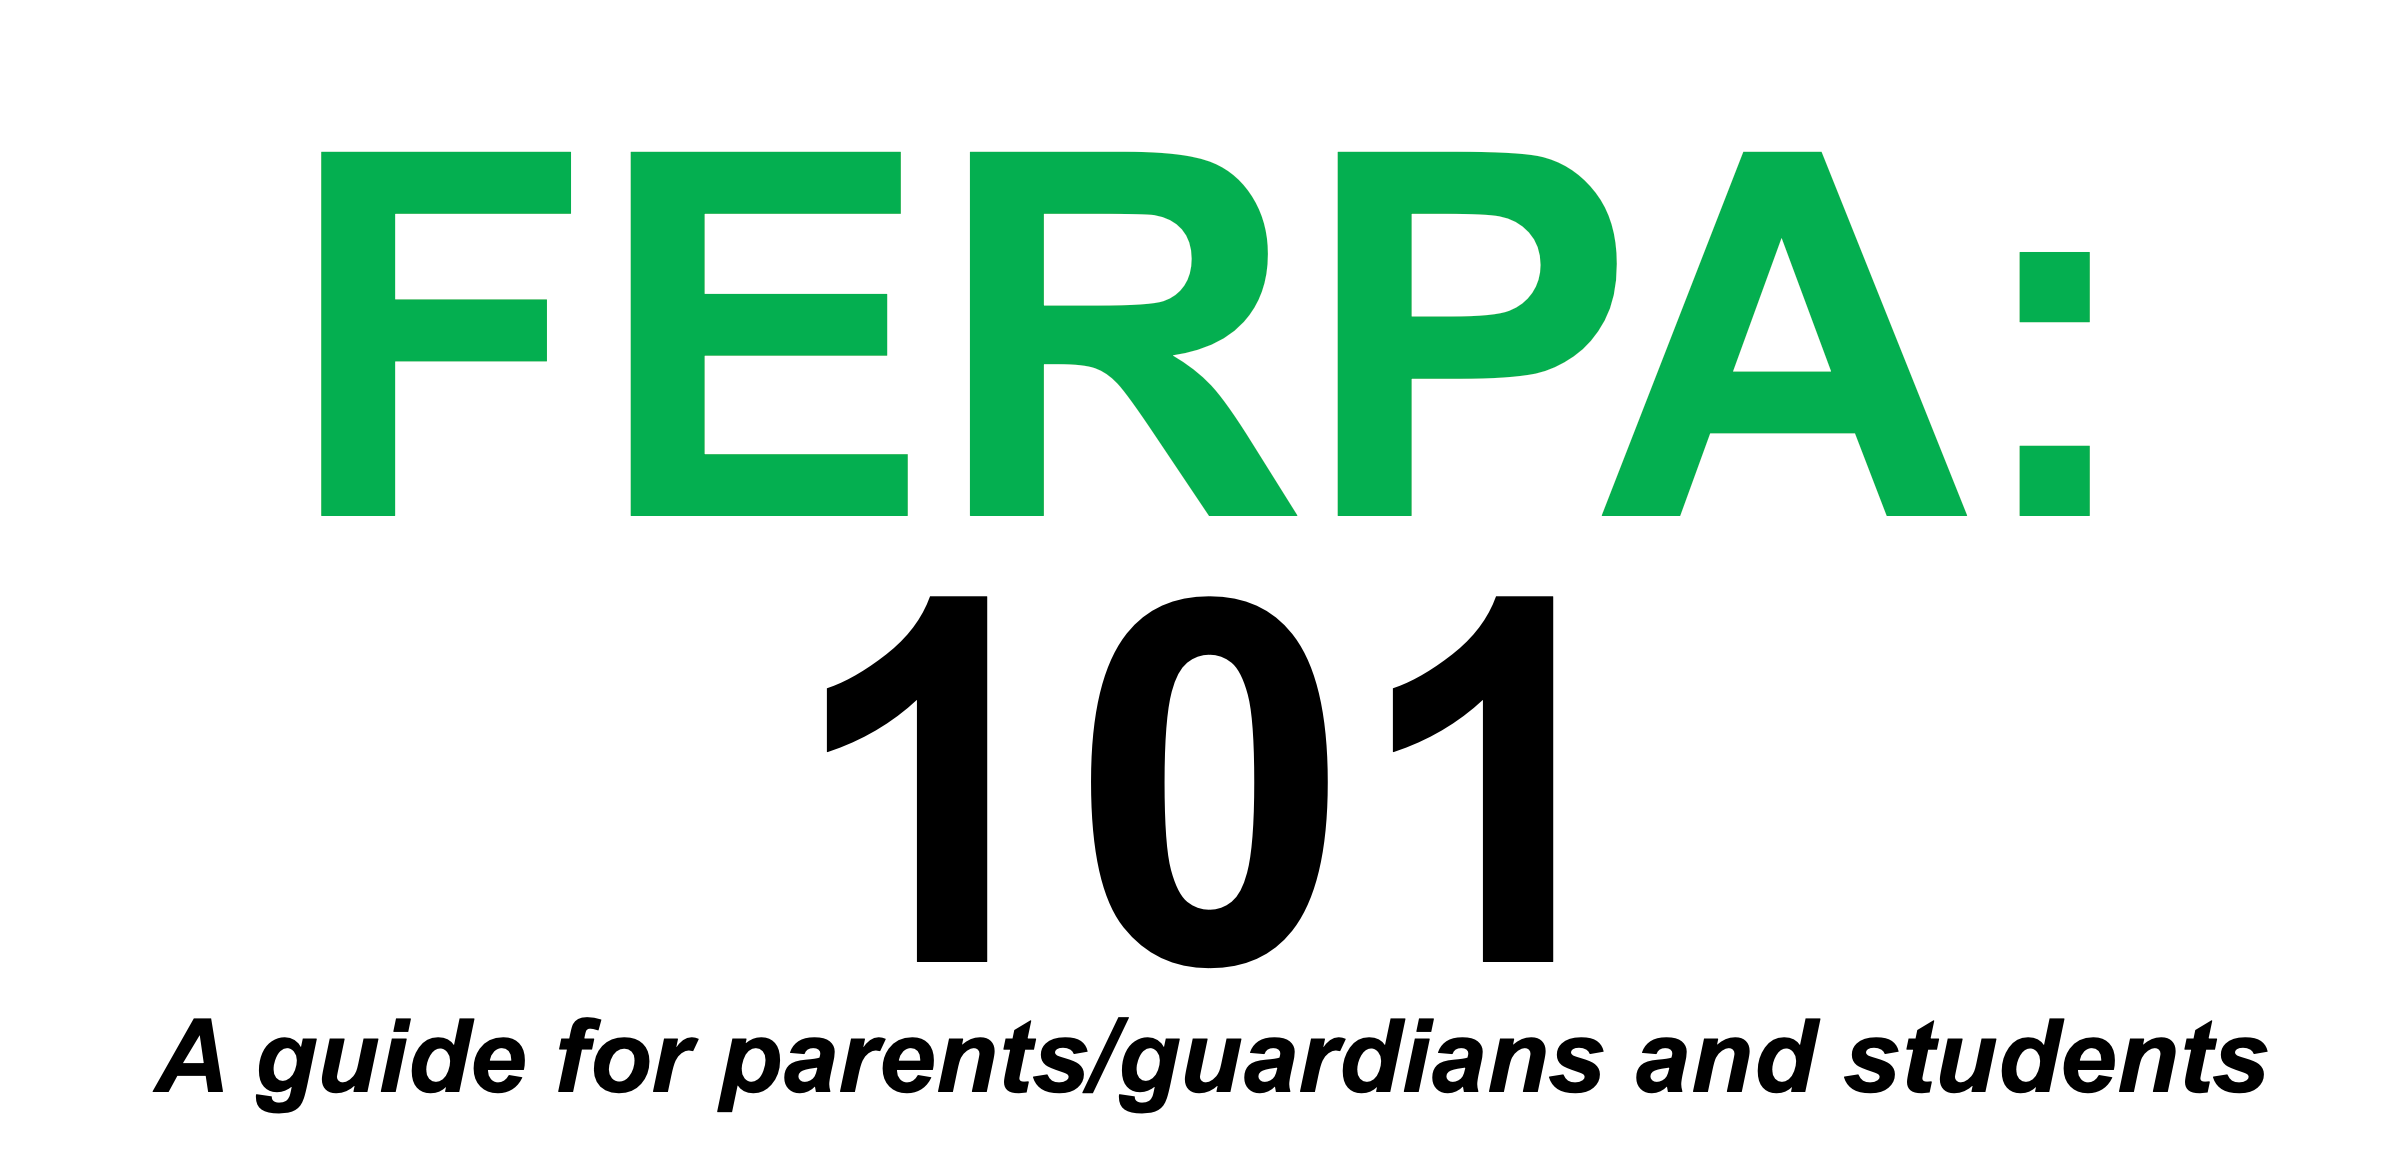 FERPA 101 - A Guide for parents, guardians and students